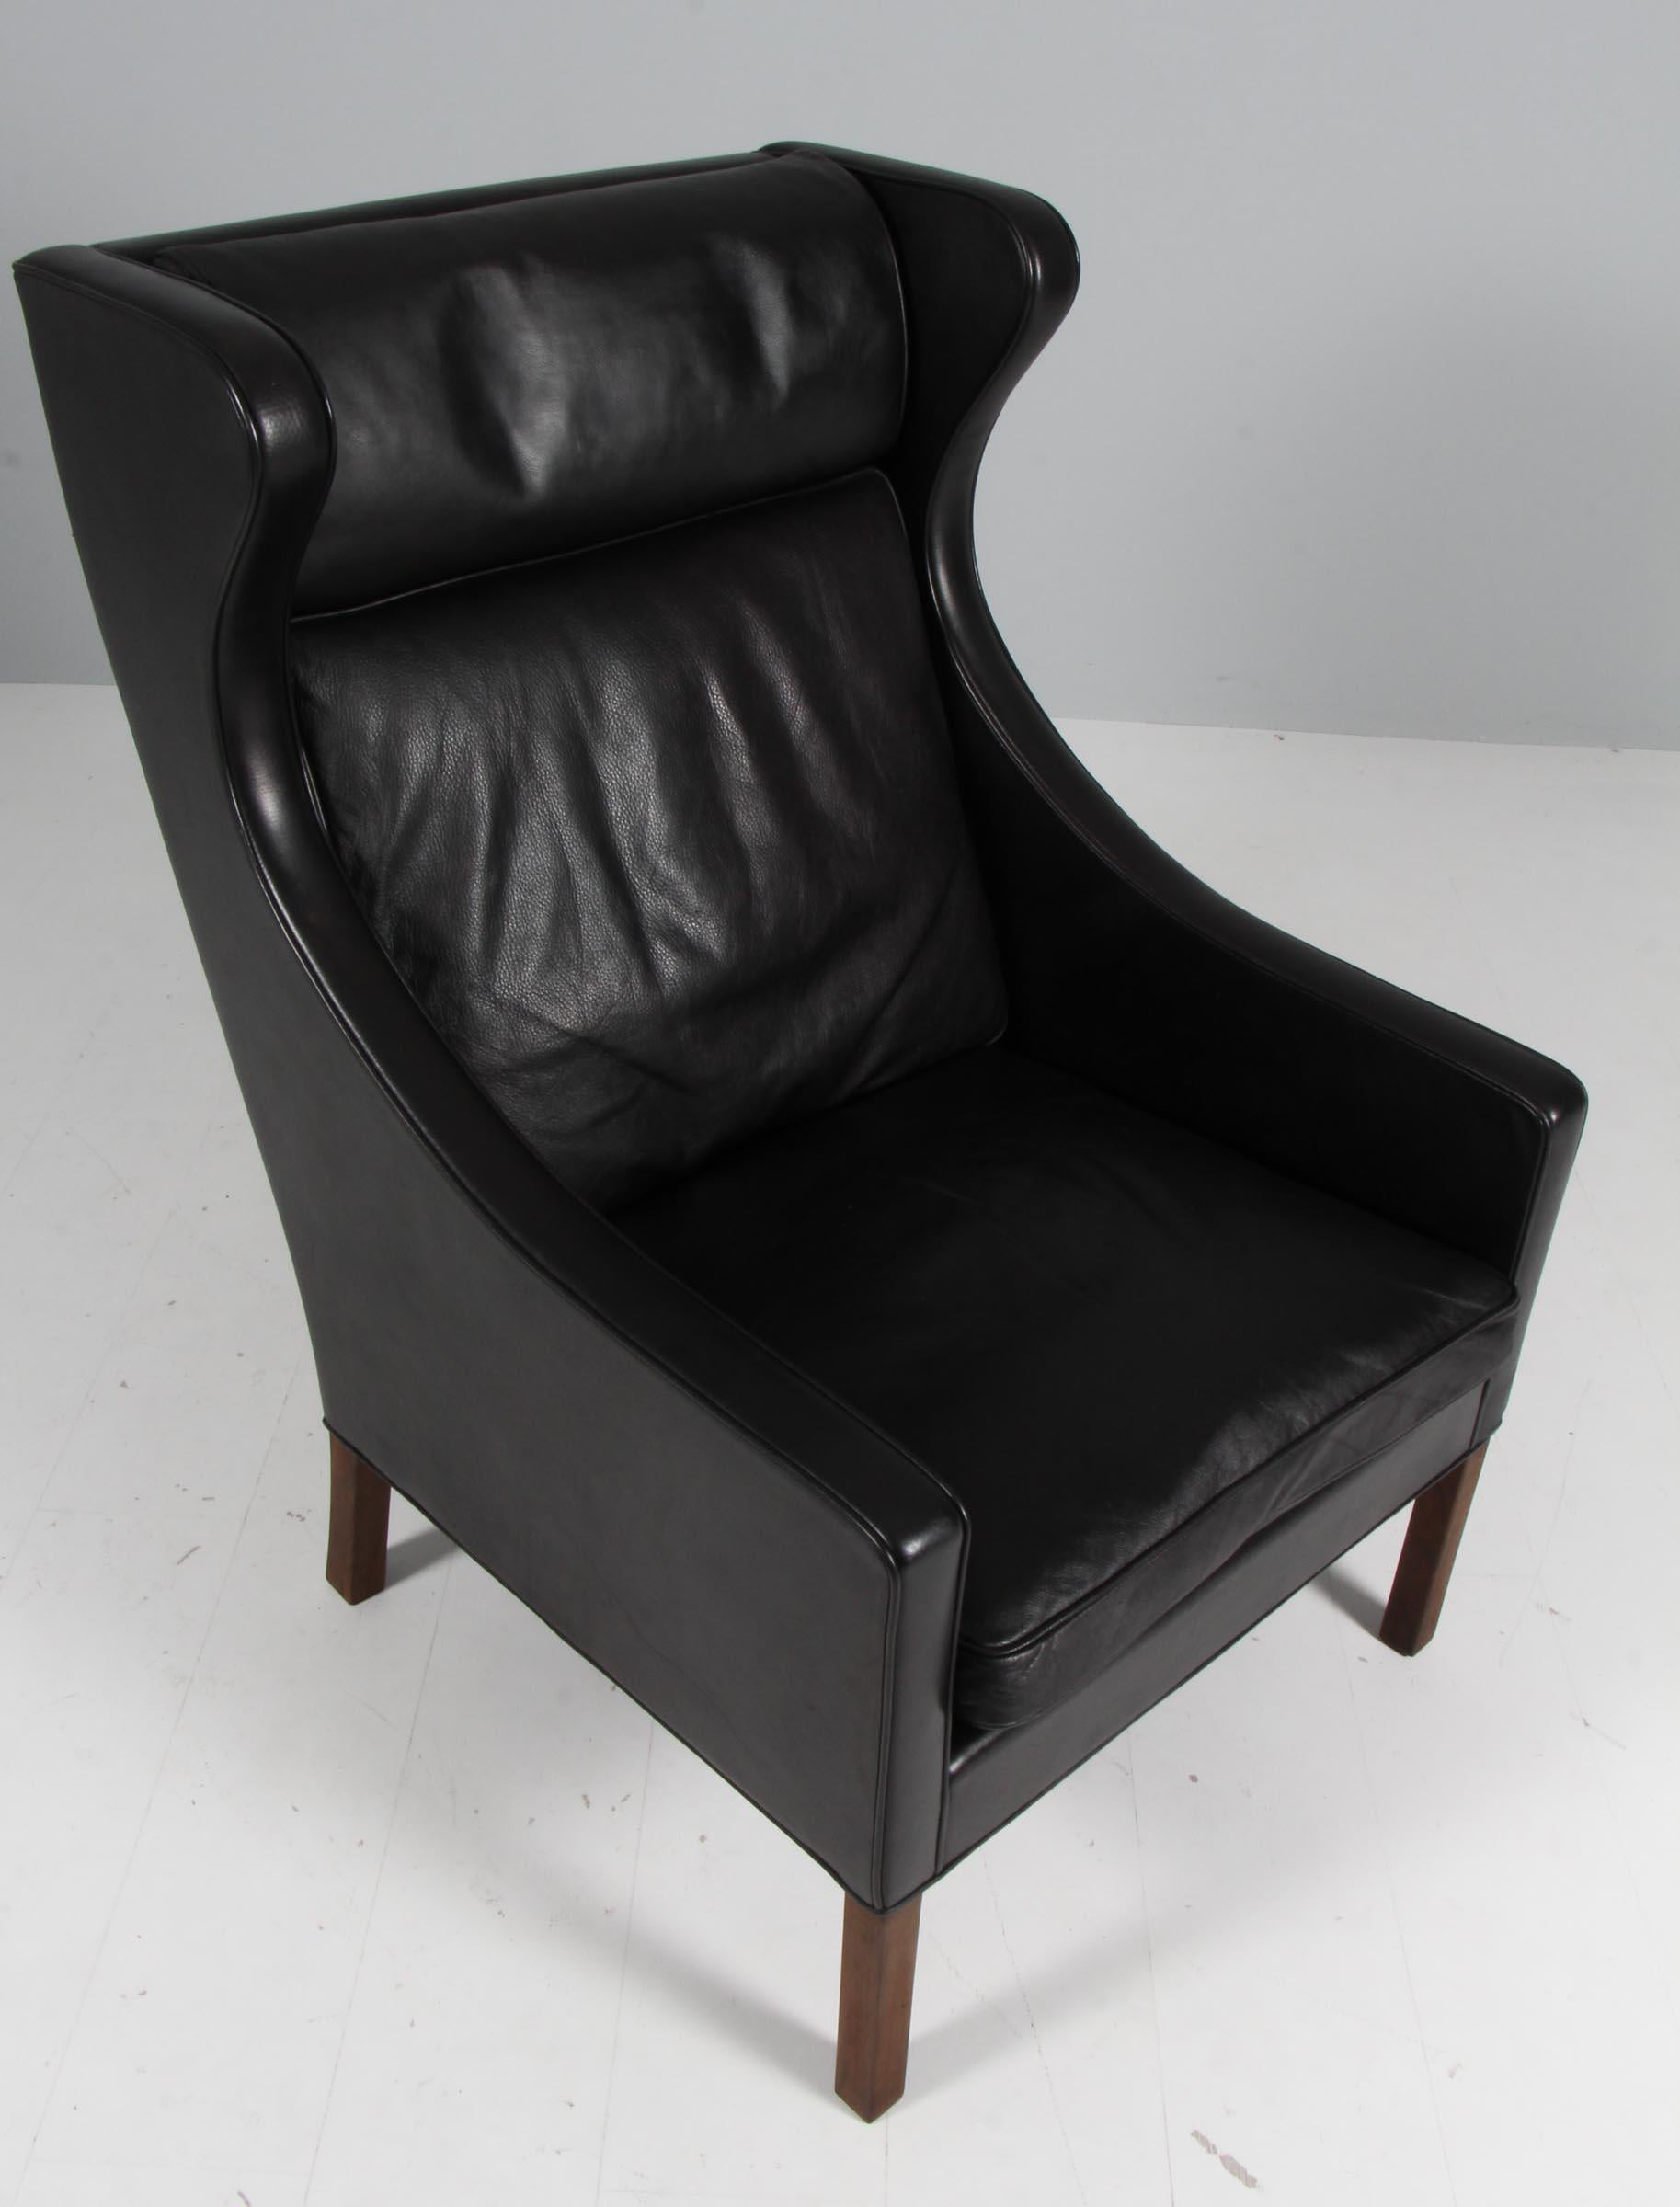 Børge Mogensen Wingback Chair and Ottoman, Model 2202 / 2204, Original Leather In Good Condition For Sale In Esbjerg, DK